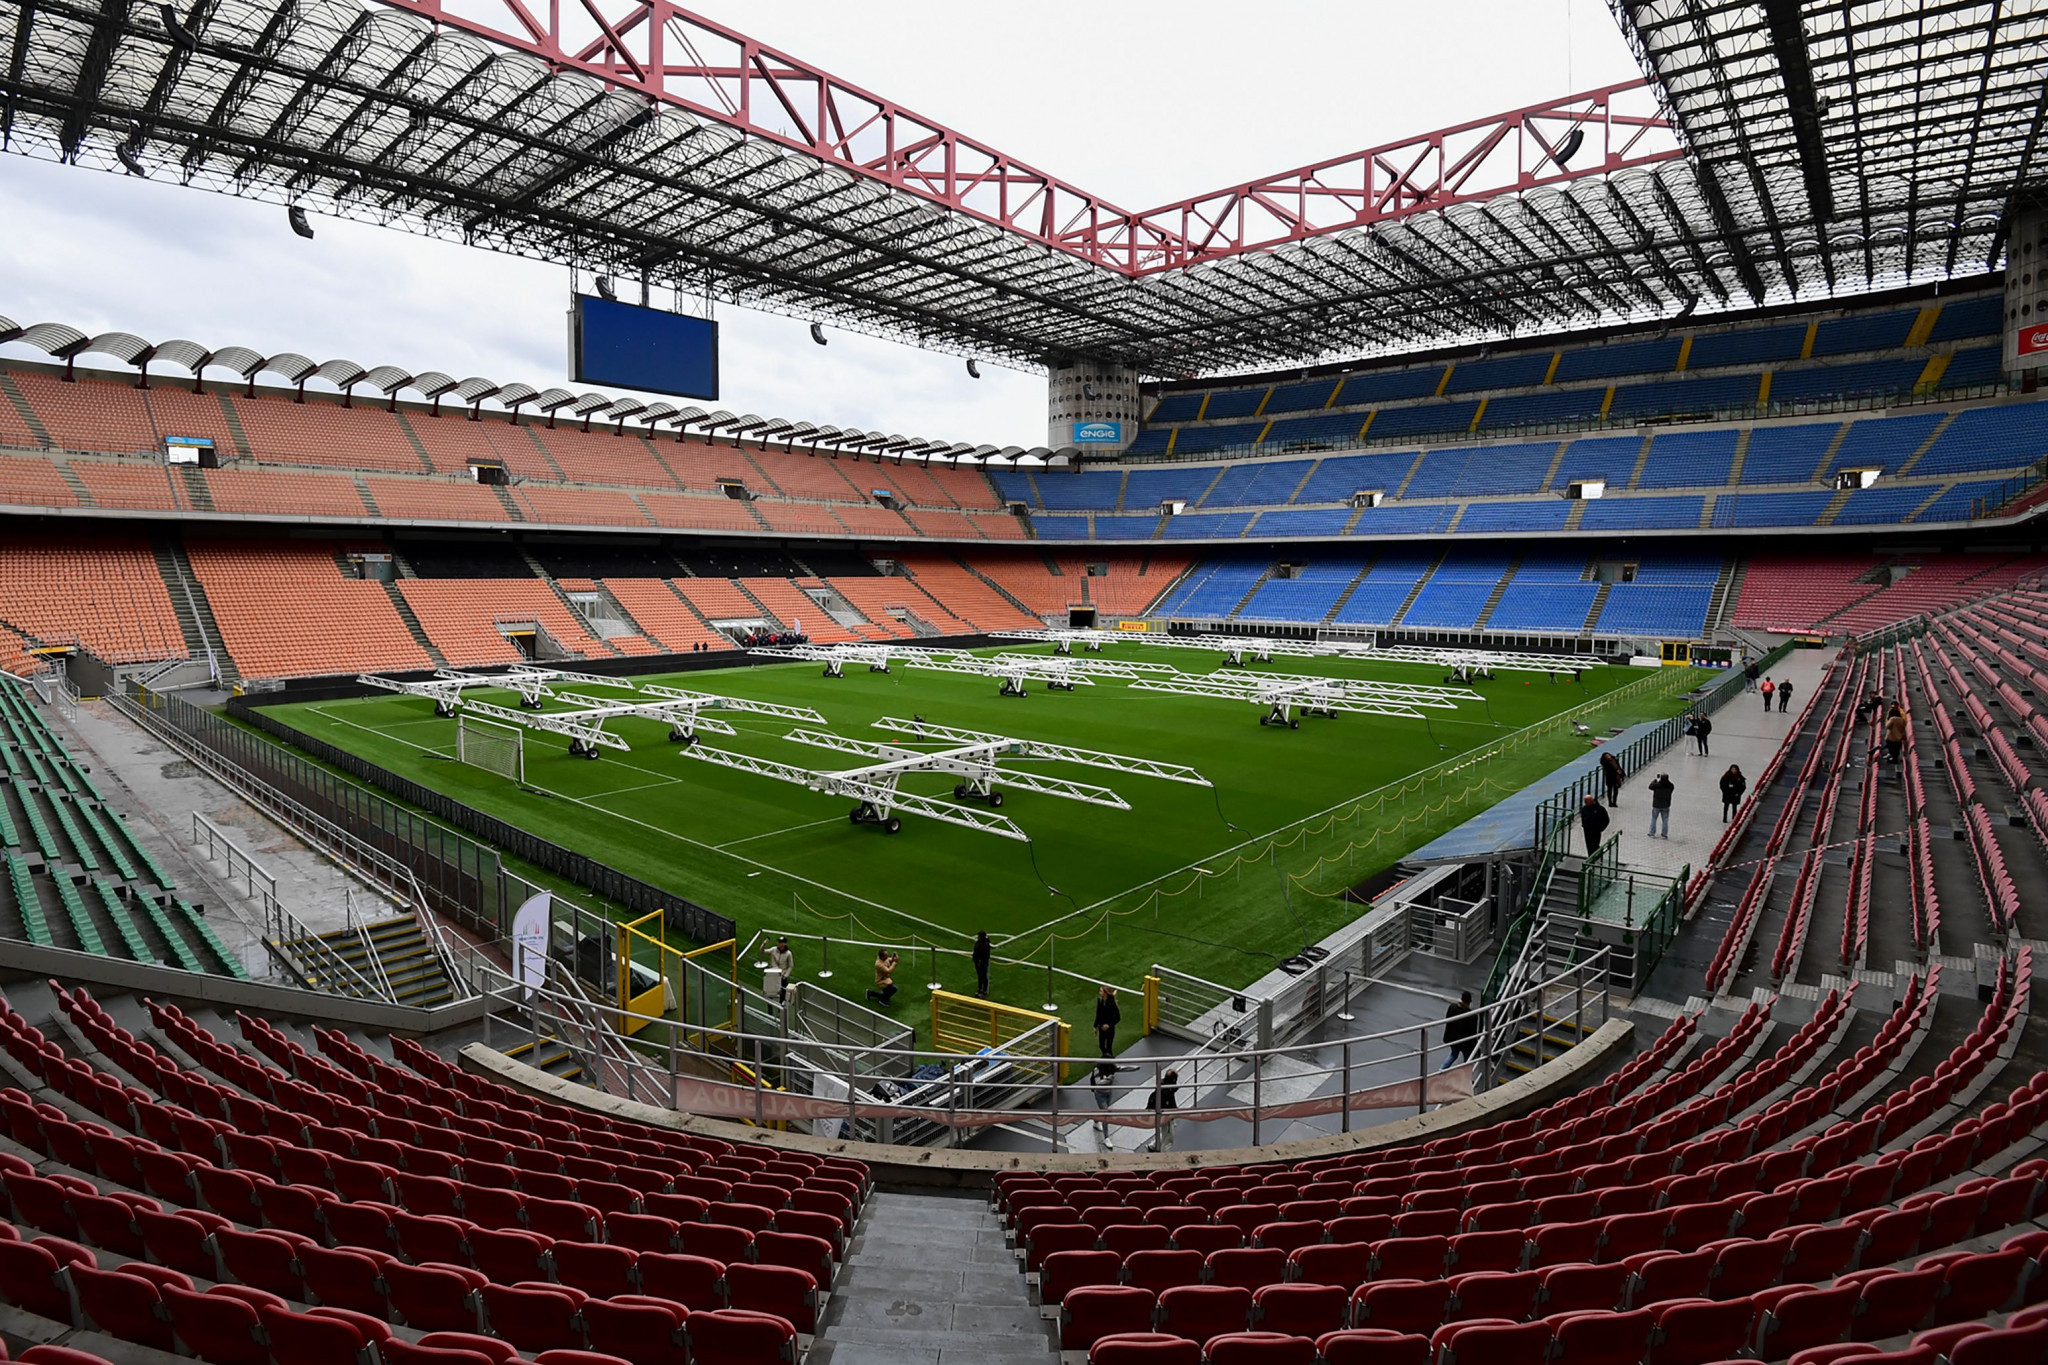 San Siro is due to host the Opening Ceremony if Milan Cortina is awarded the 2026 Winter Olympic and Paralympic Games ©Getty Images